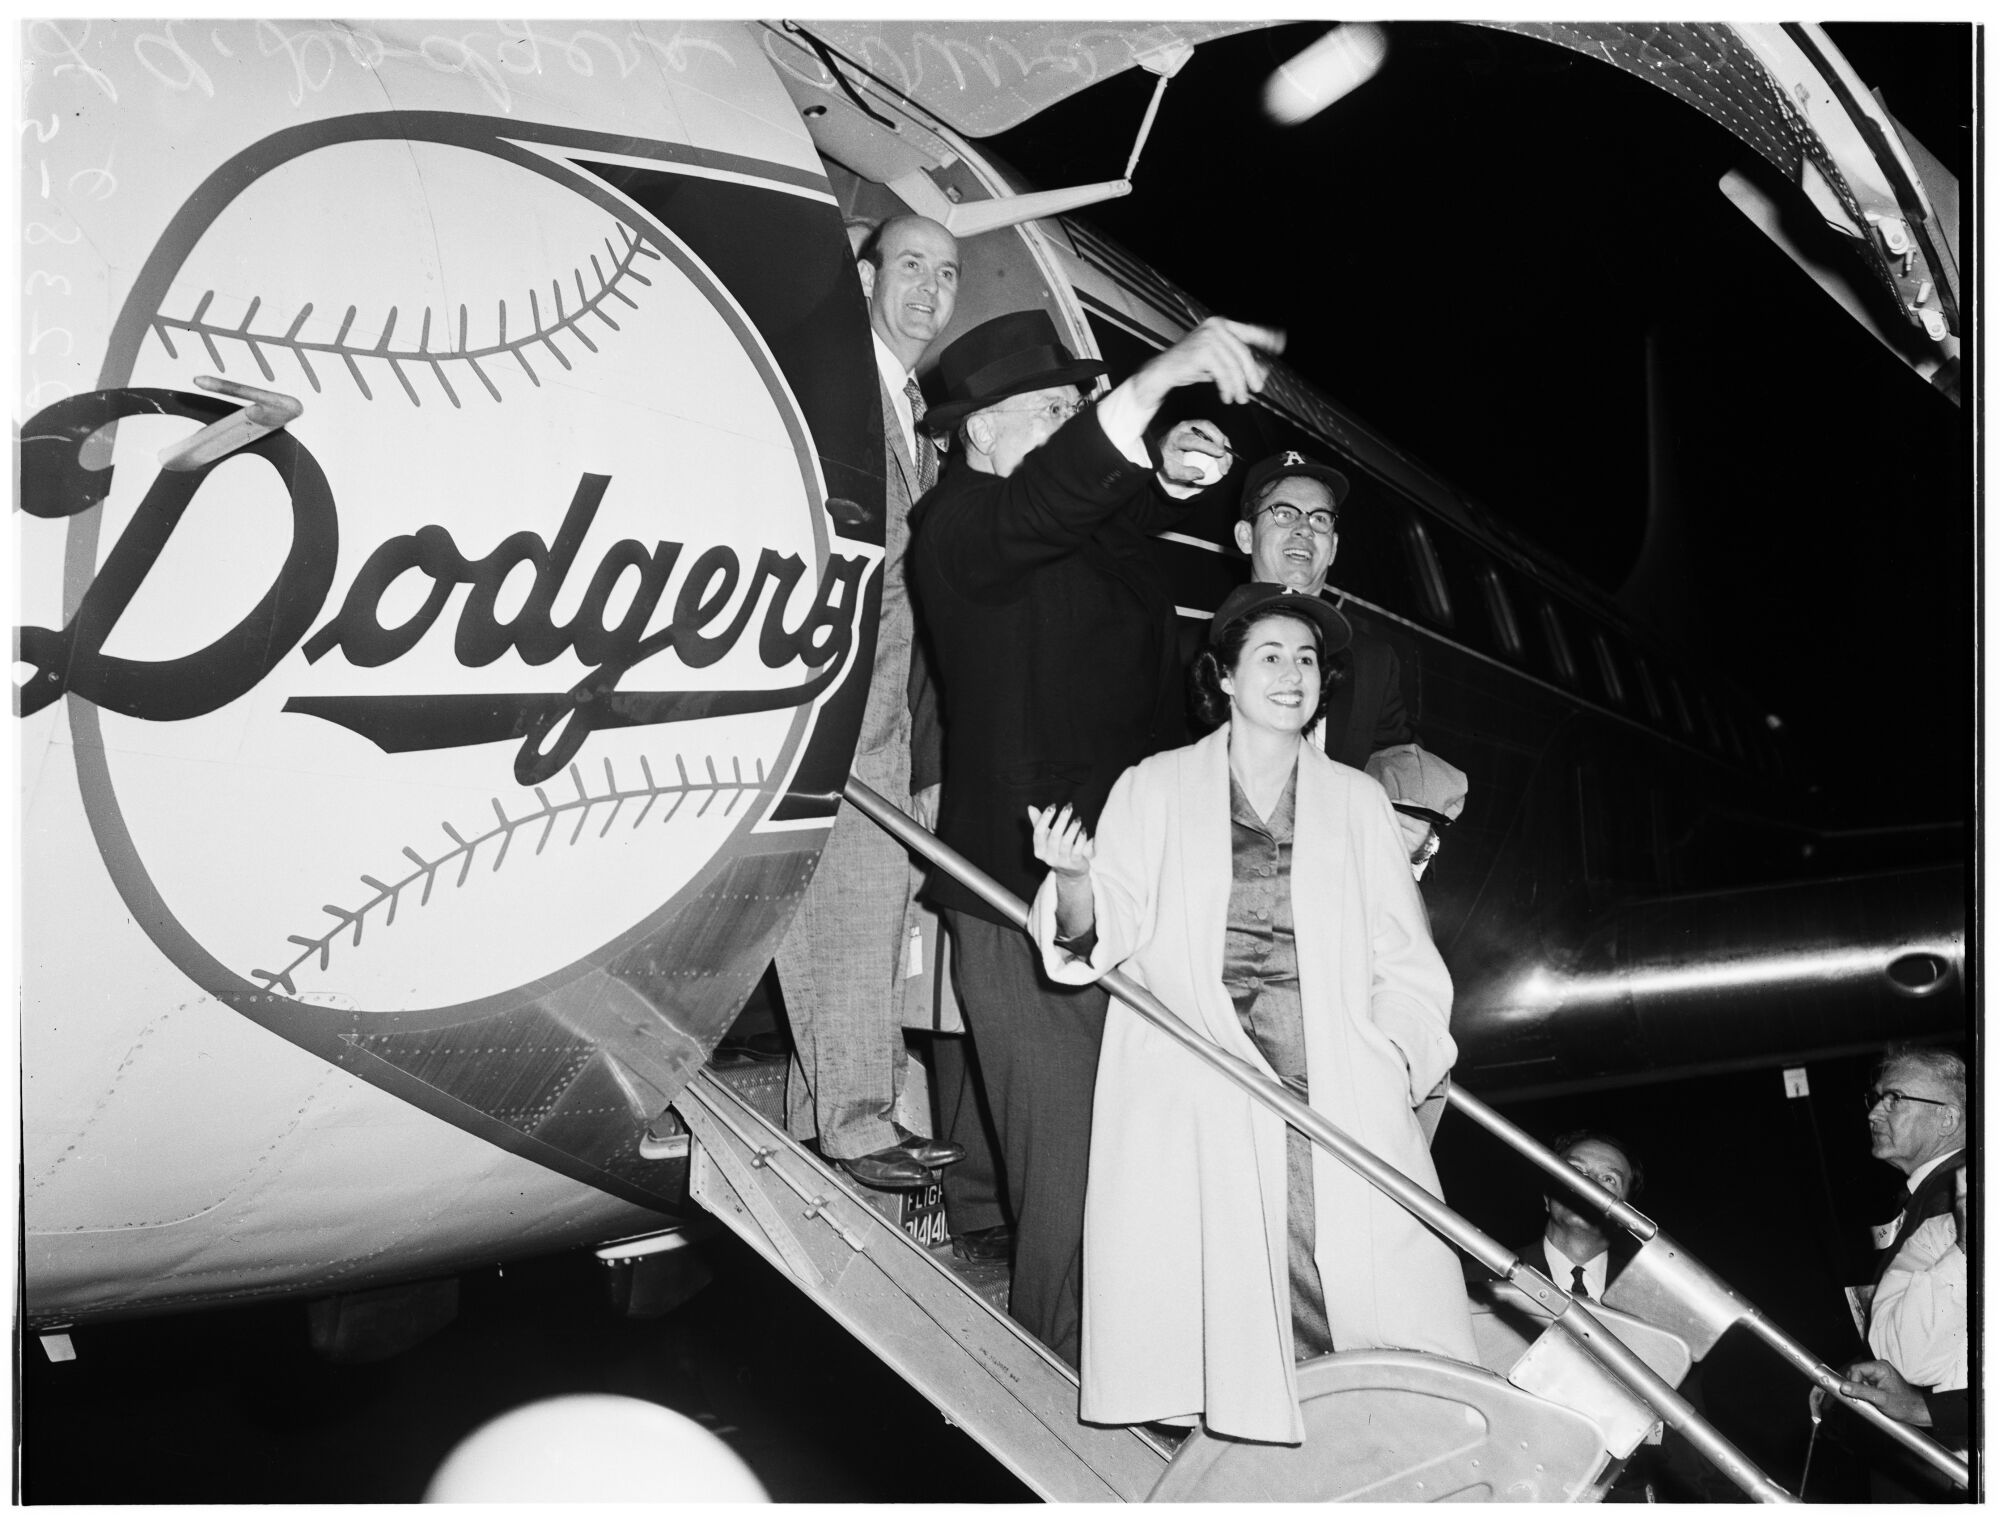 Walter O'Malley throwing out a baseball while descending airplane stairs as a woman watches.